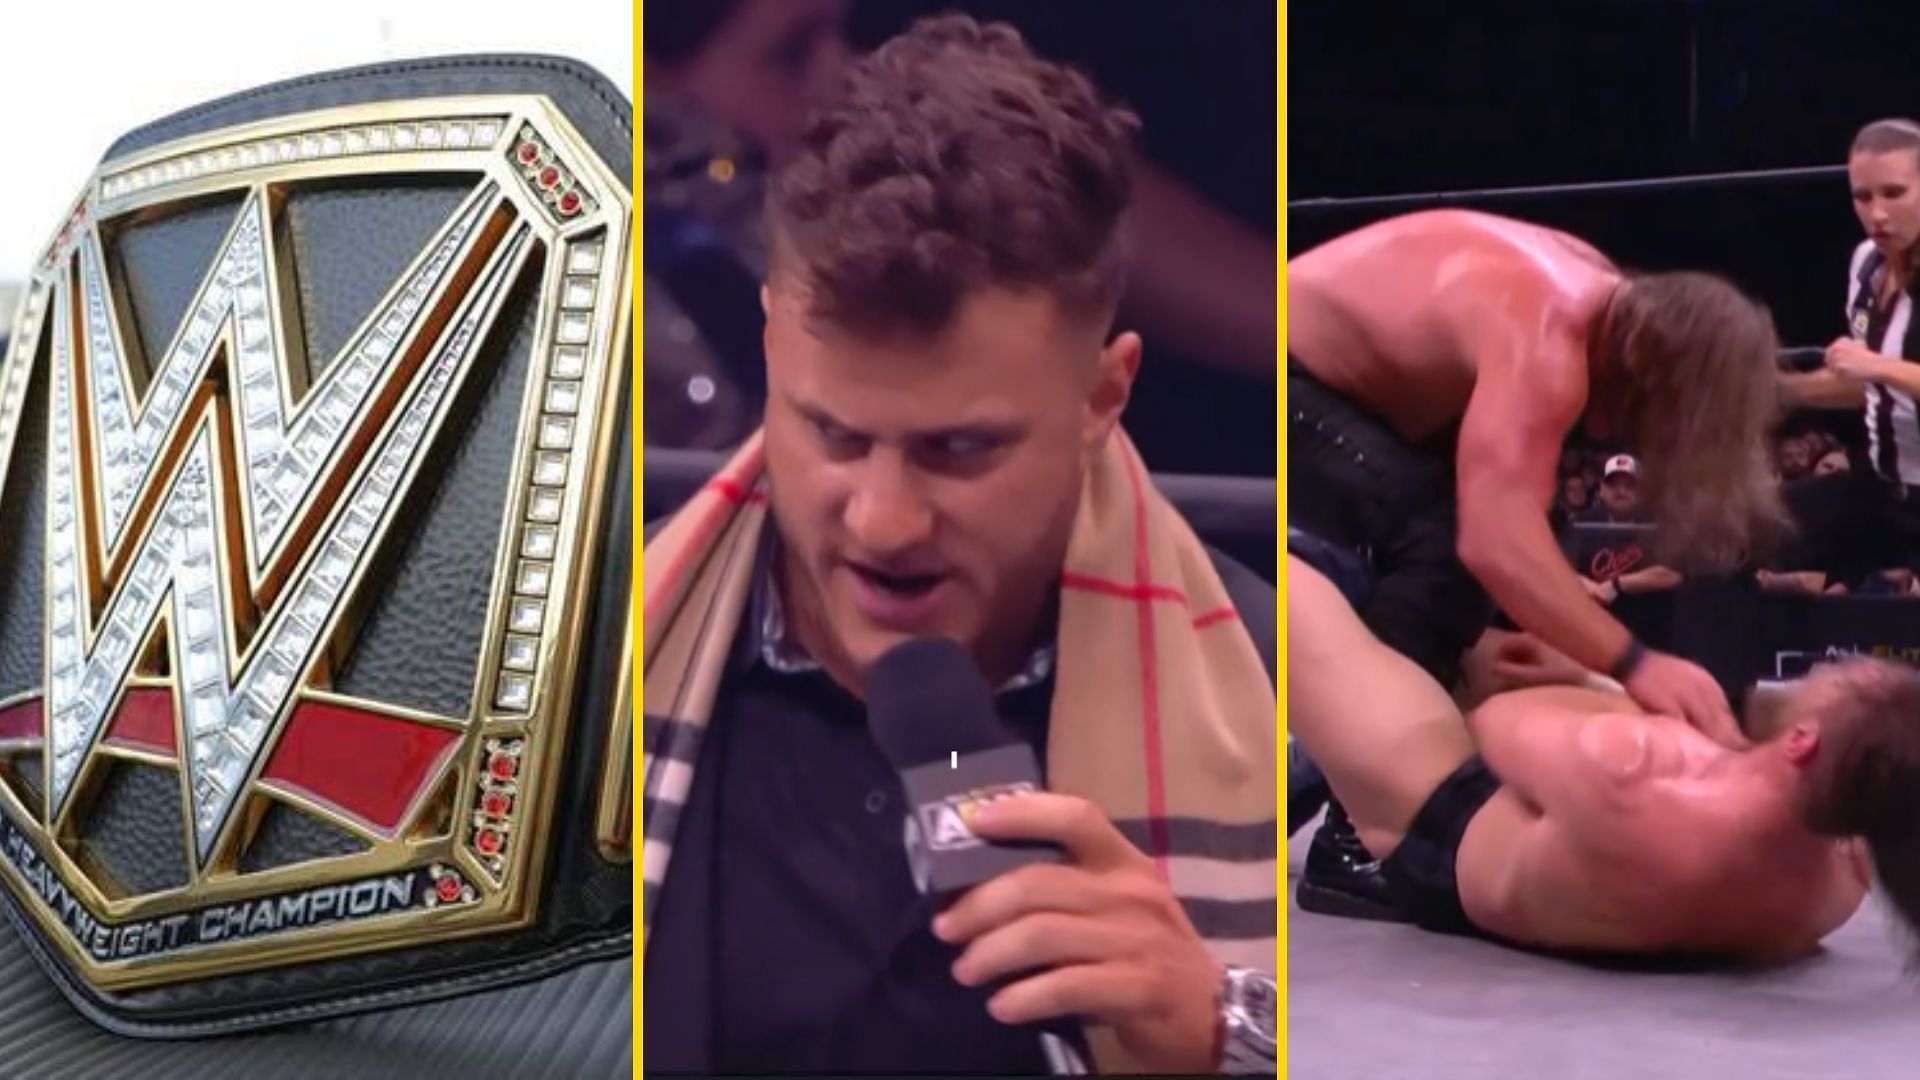 MJF called out a former world champion before revealing the name of Stokely Hathaway